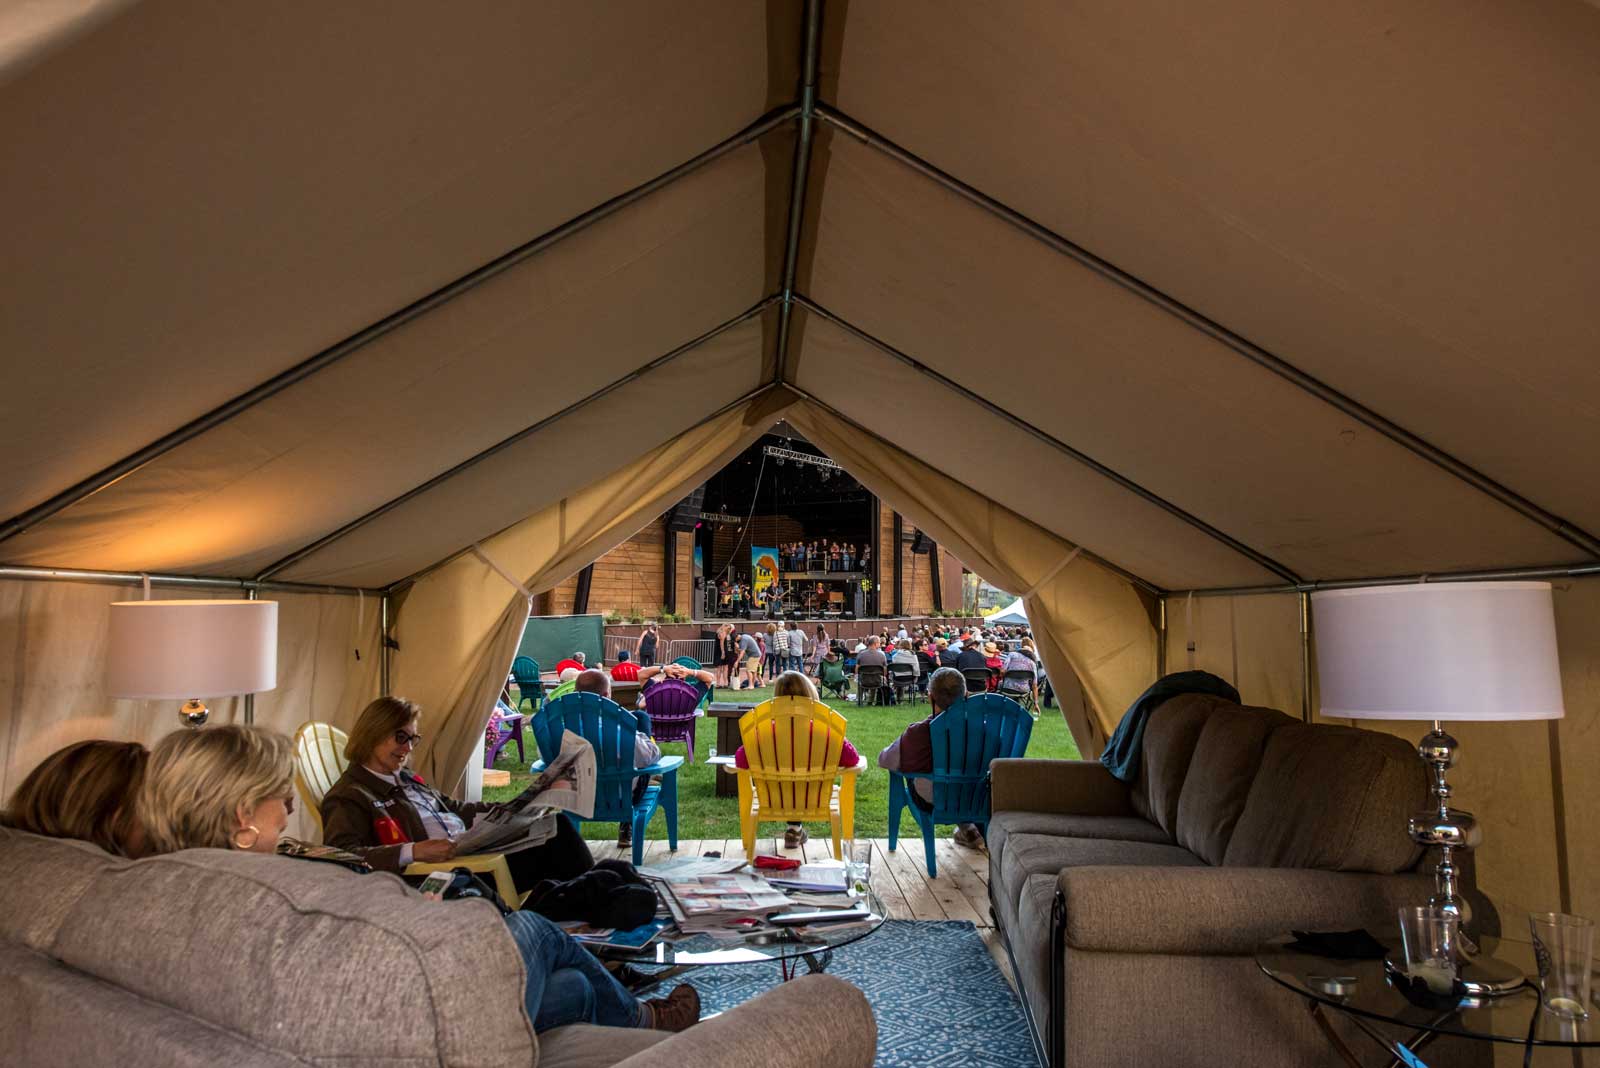  Safari Cabanas offer shelter or just a great place for your group to call "home base" during the festival. Enjoy the Main Stage entertainment from the comfort of your own Safari Tent curated with luxurious conveniences and a concierge service. 